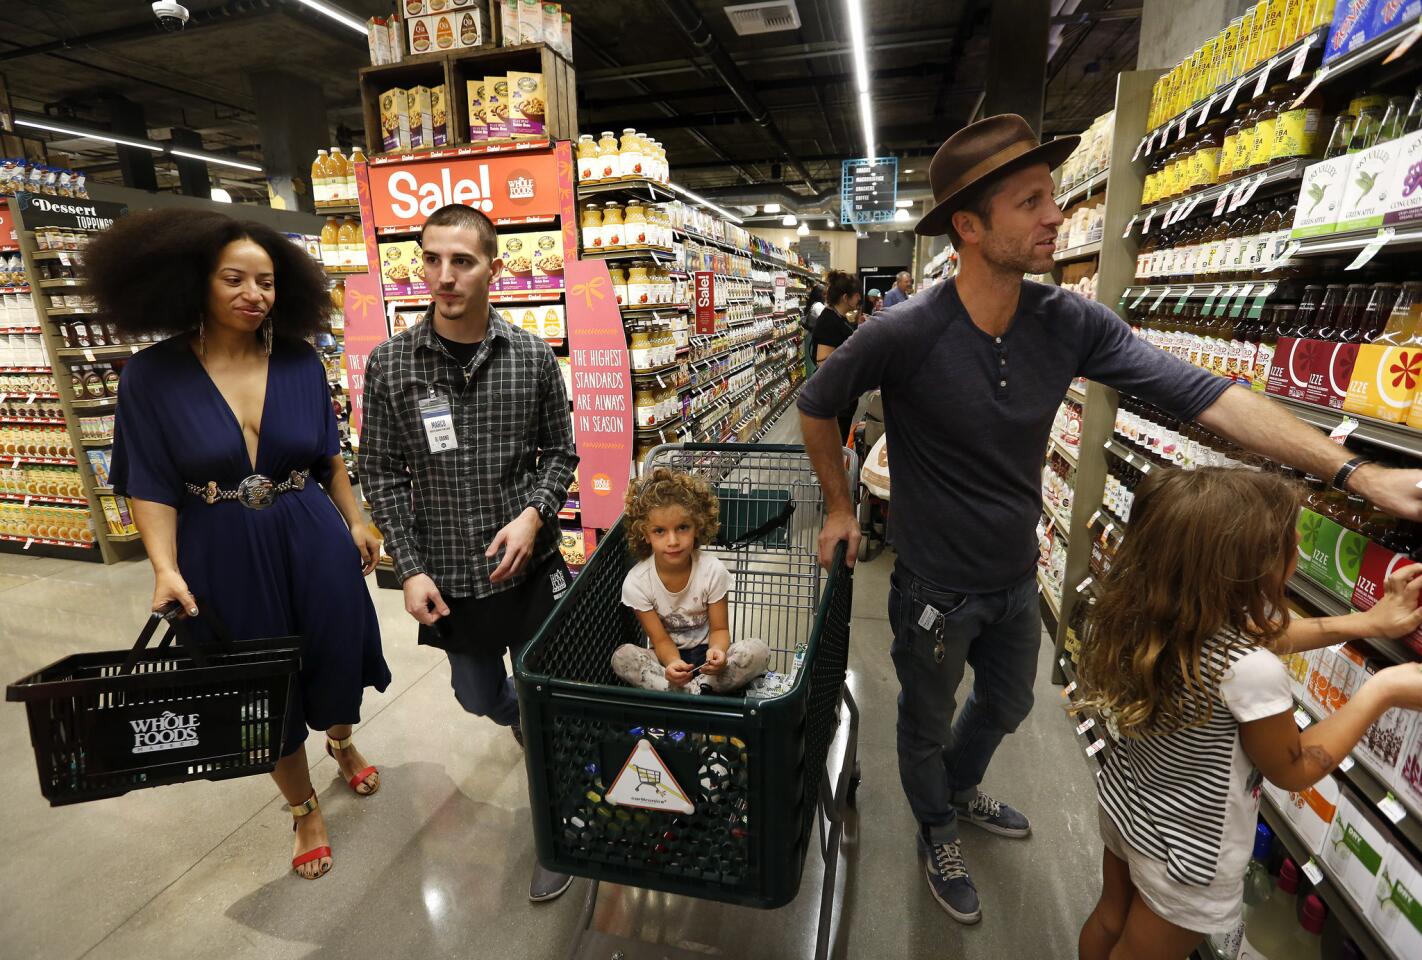 Michael Leone, right, shops with his daughters, Simone, 4, left, and Lucia, 6, at a new Whole Foods Market that opened Wednesday in downtown Los Angeles.